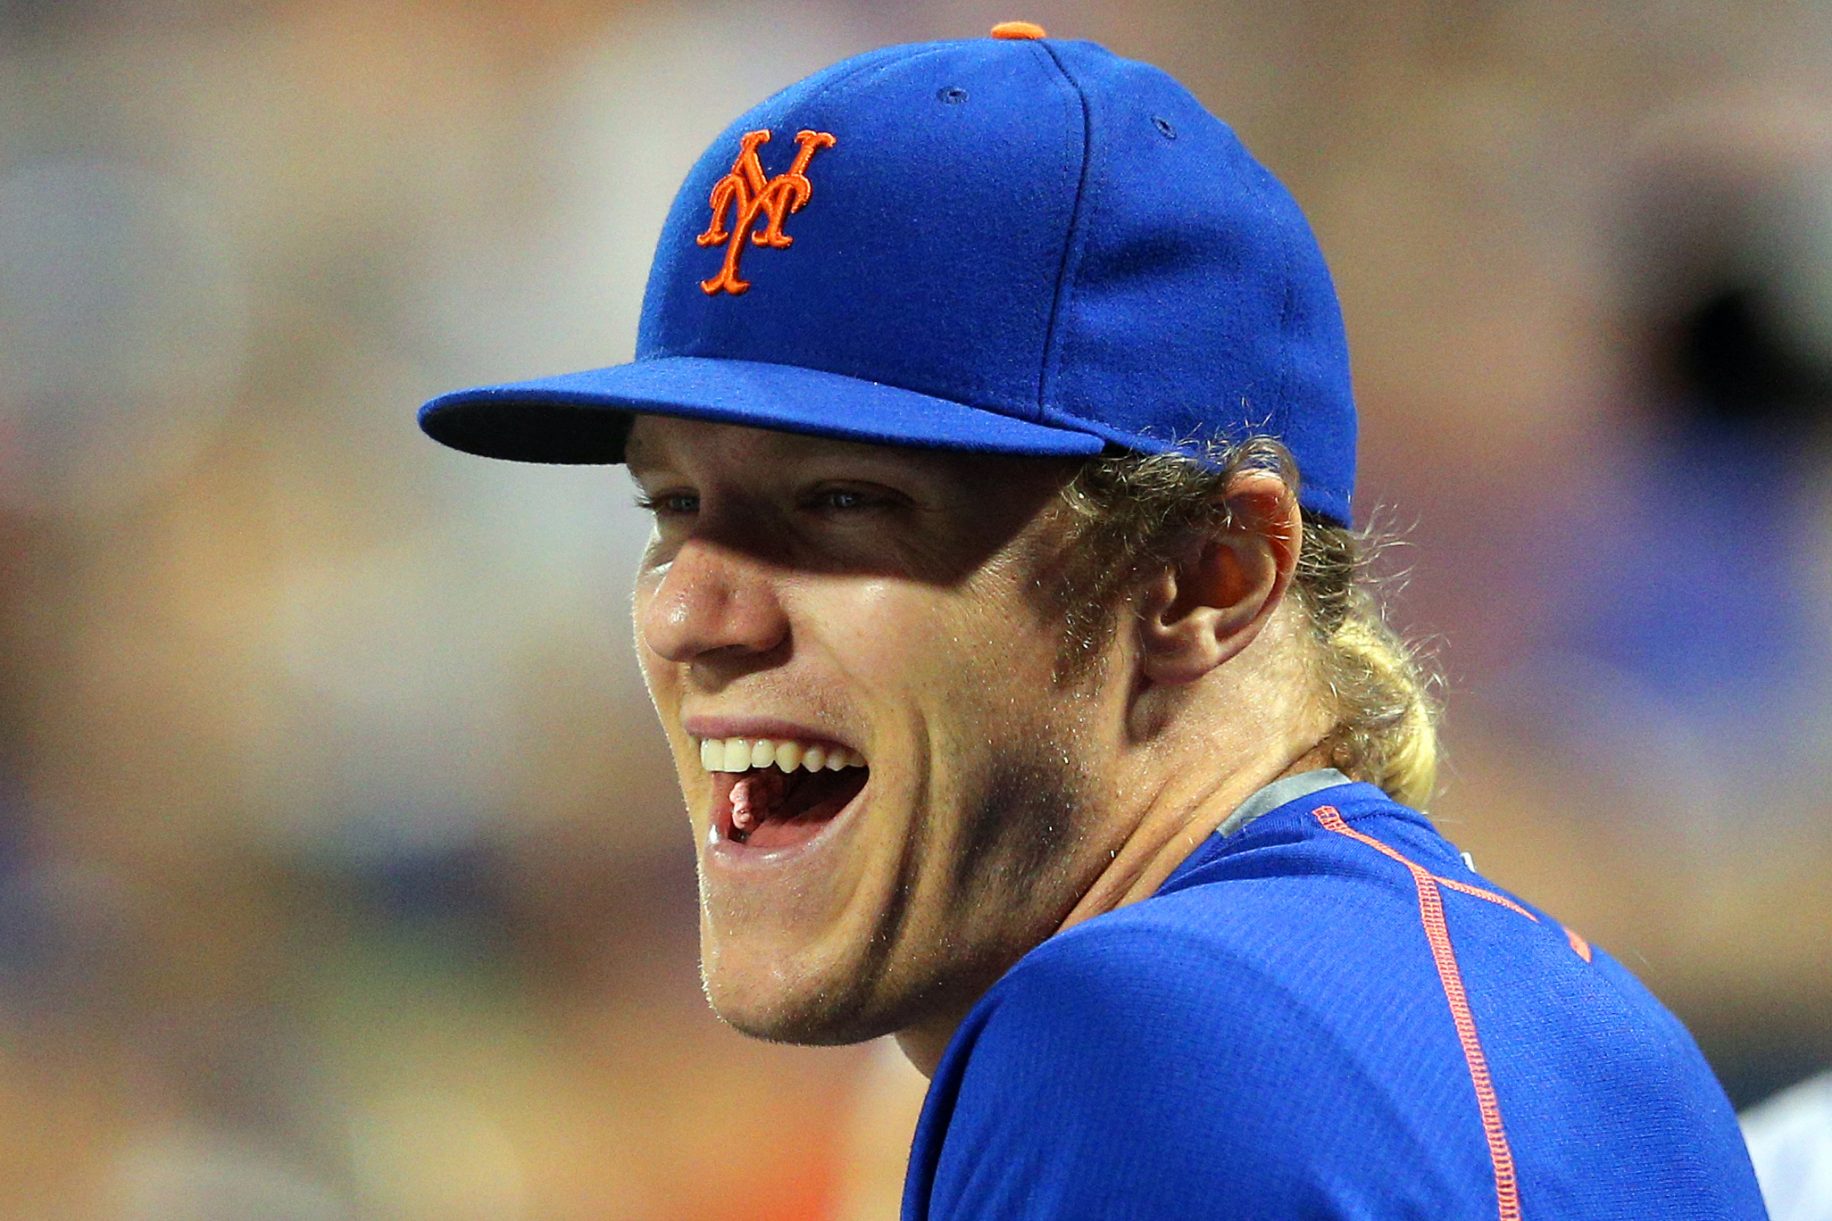 Noah Syndergaard and Twitter are making MLB relevant to younger generations 